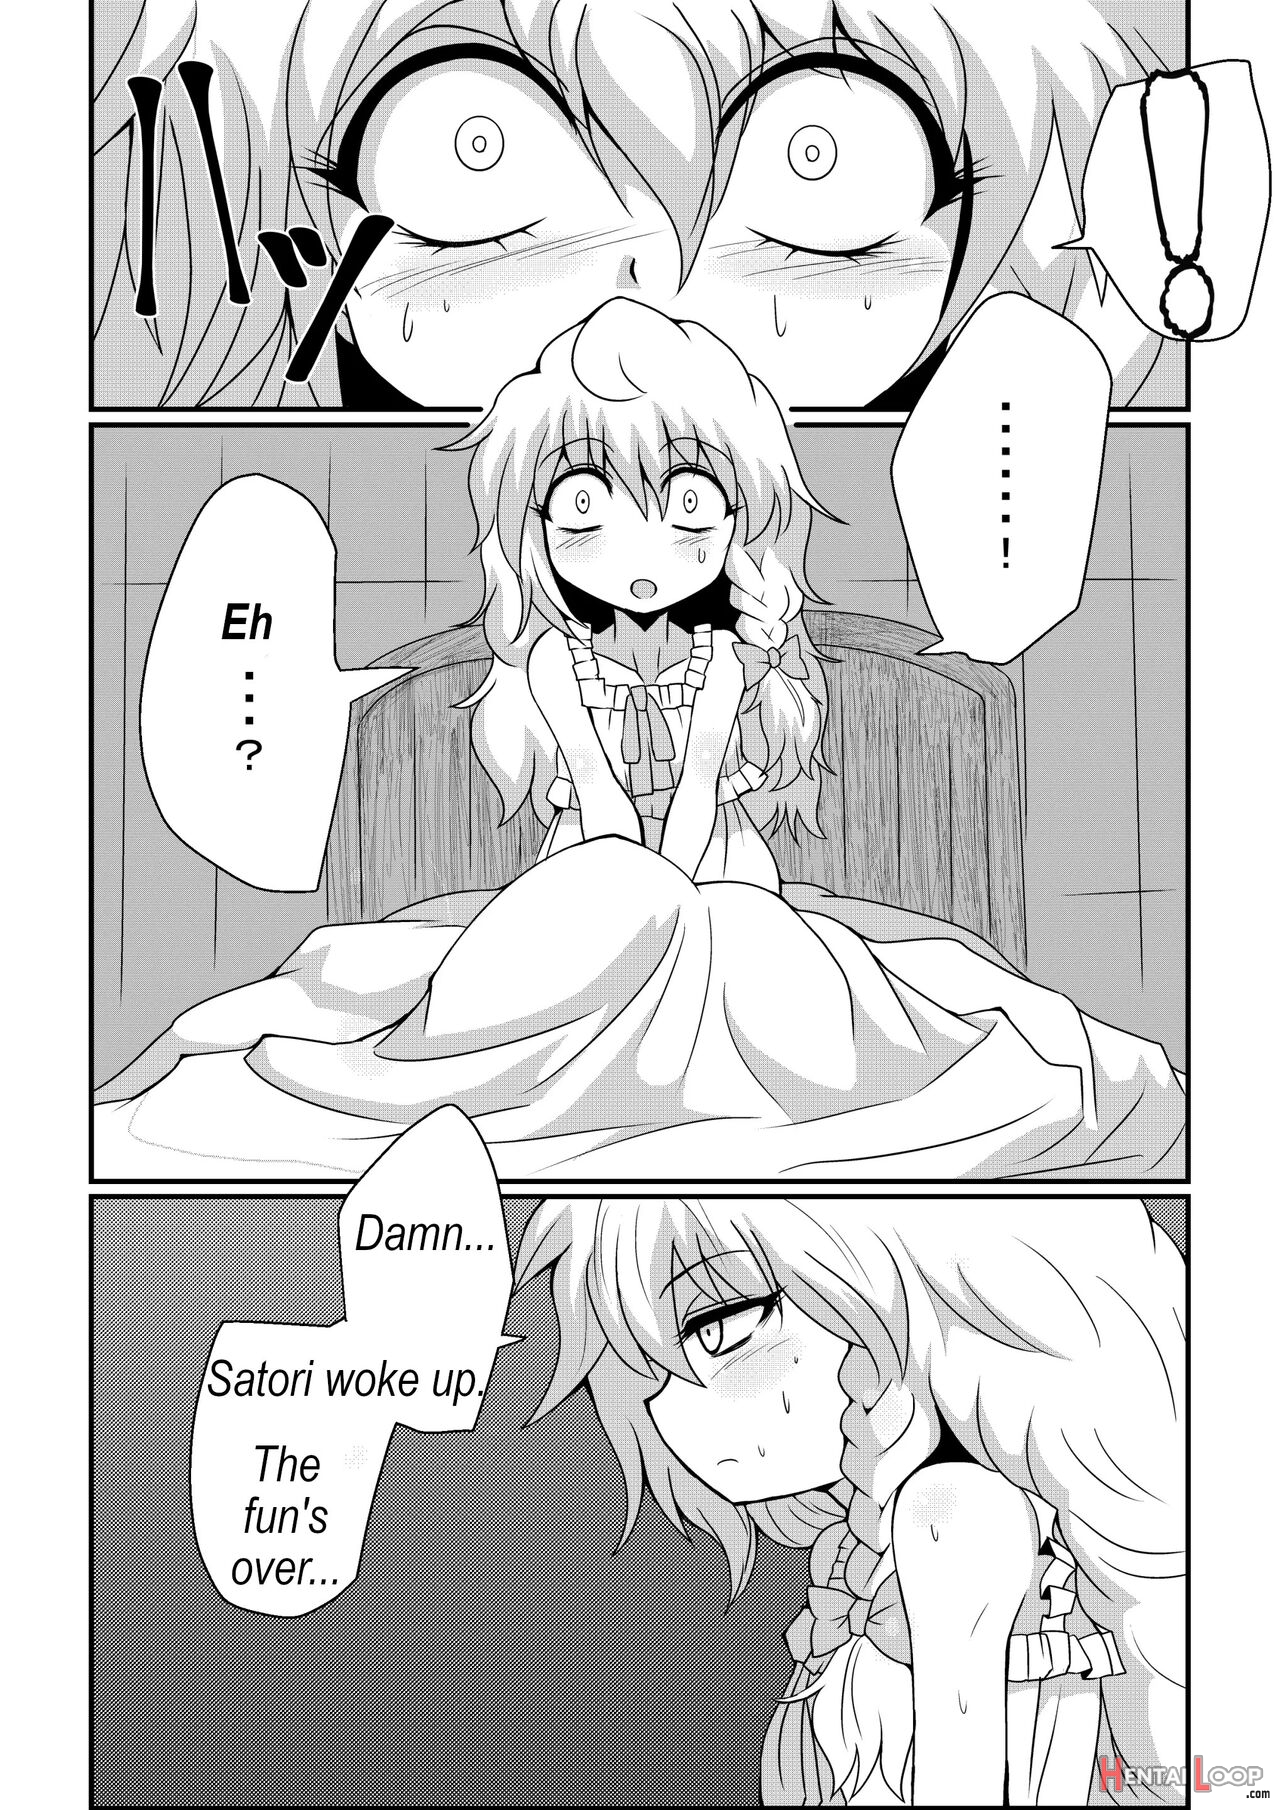 Marisa's Thrill - Take Care Of Yourself - 通り魔理沙にきをつけろ - Part 8 page 6